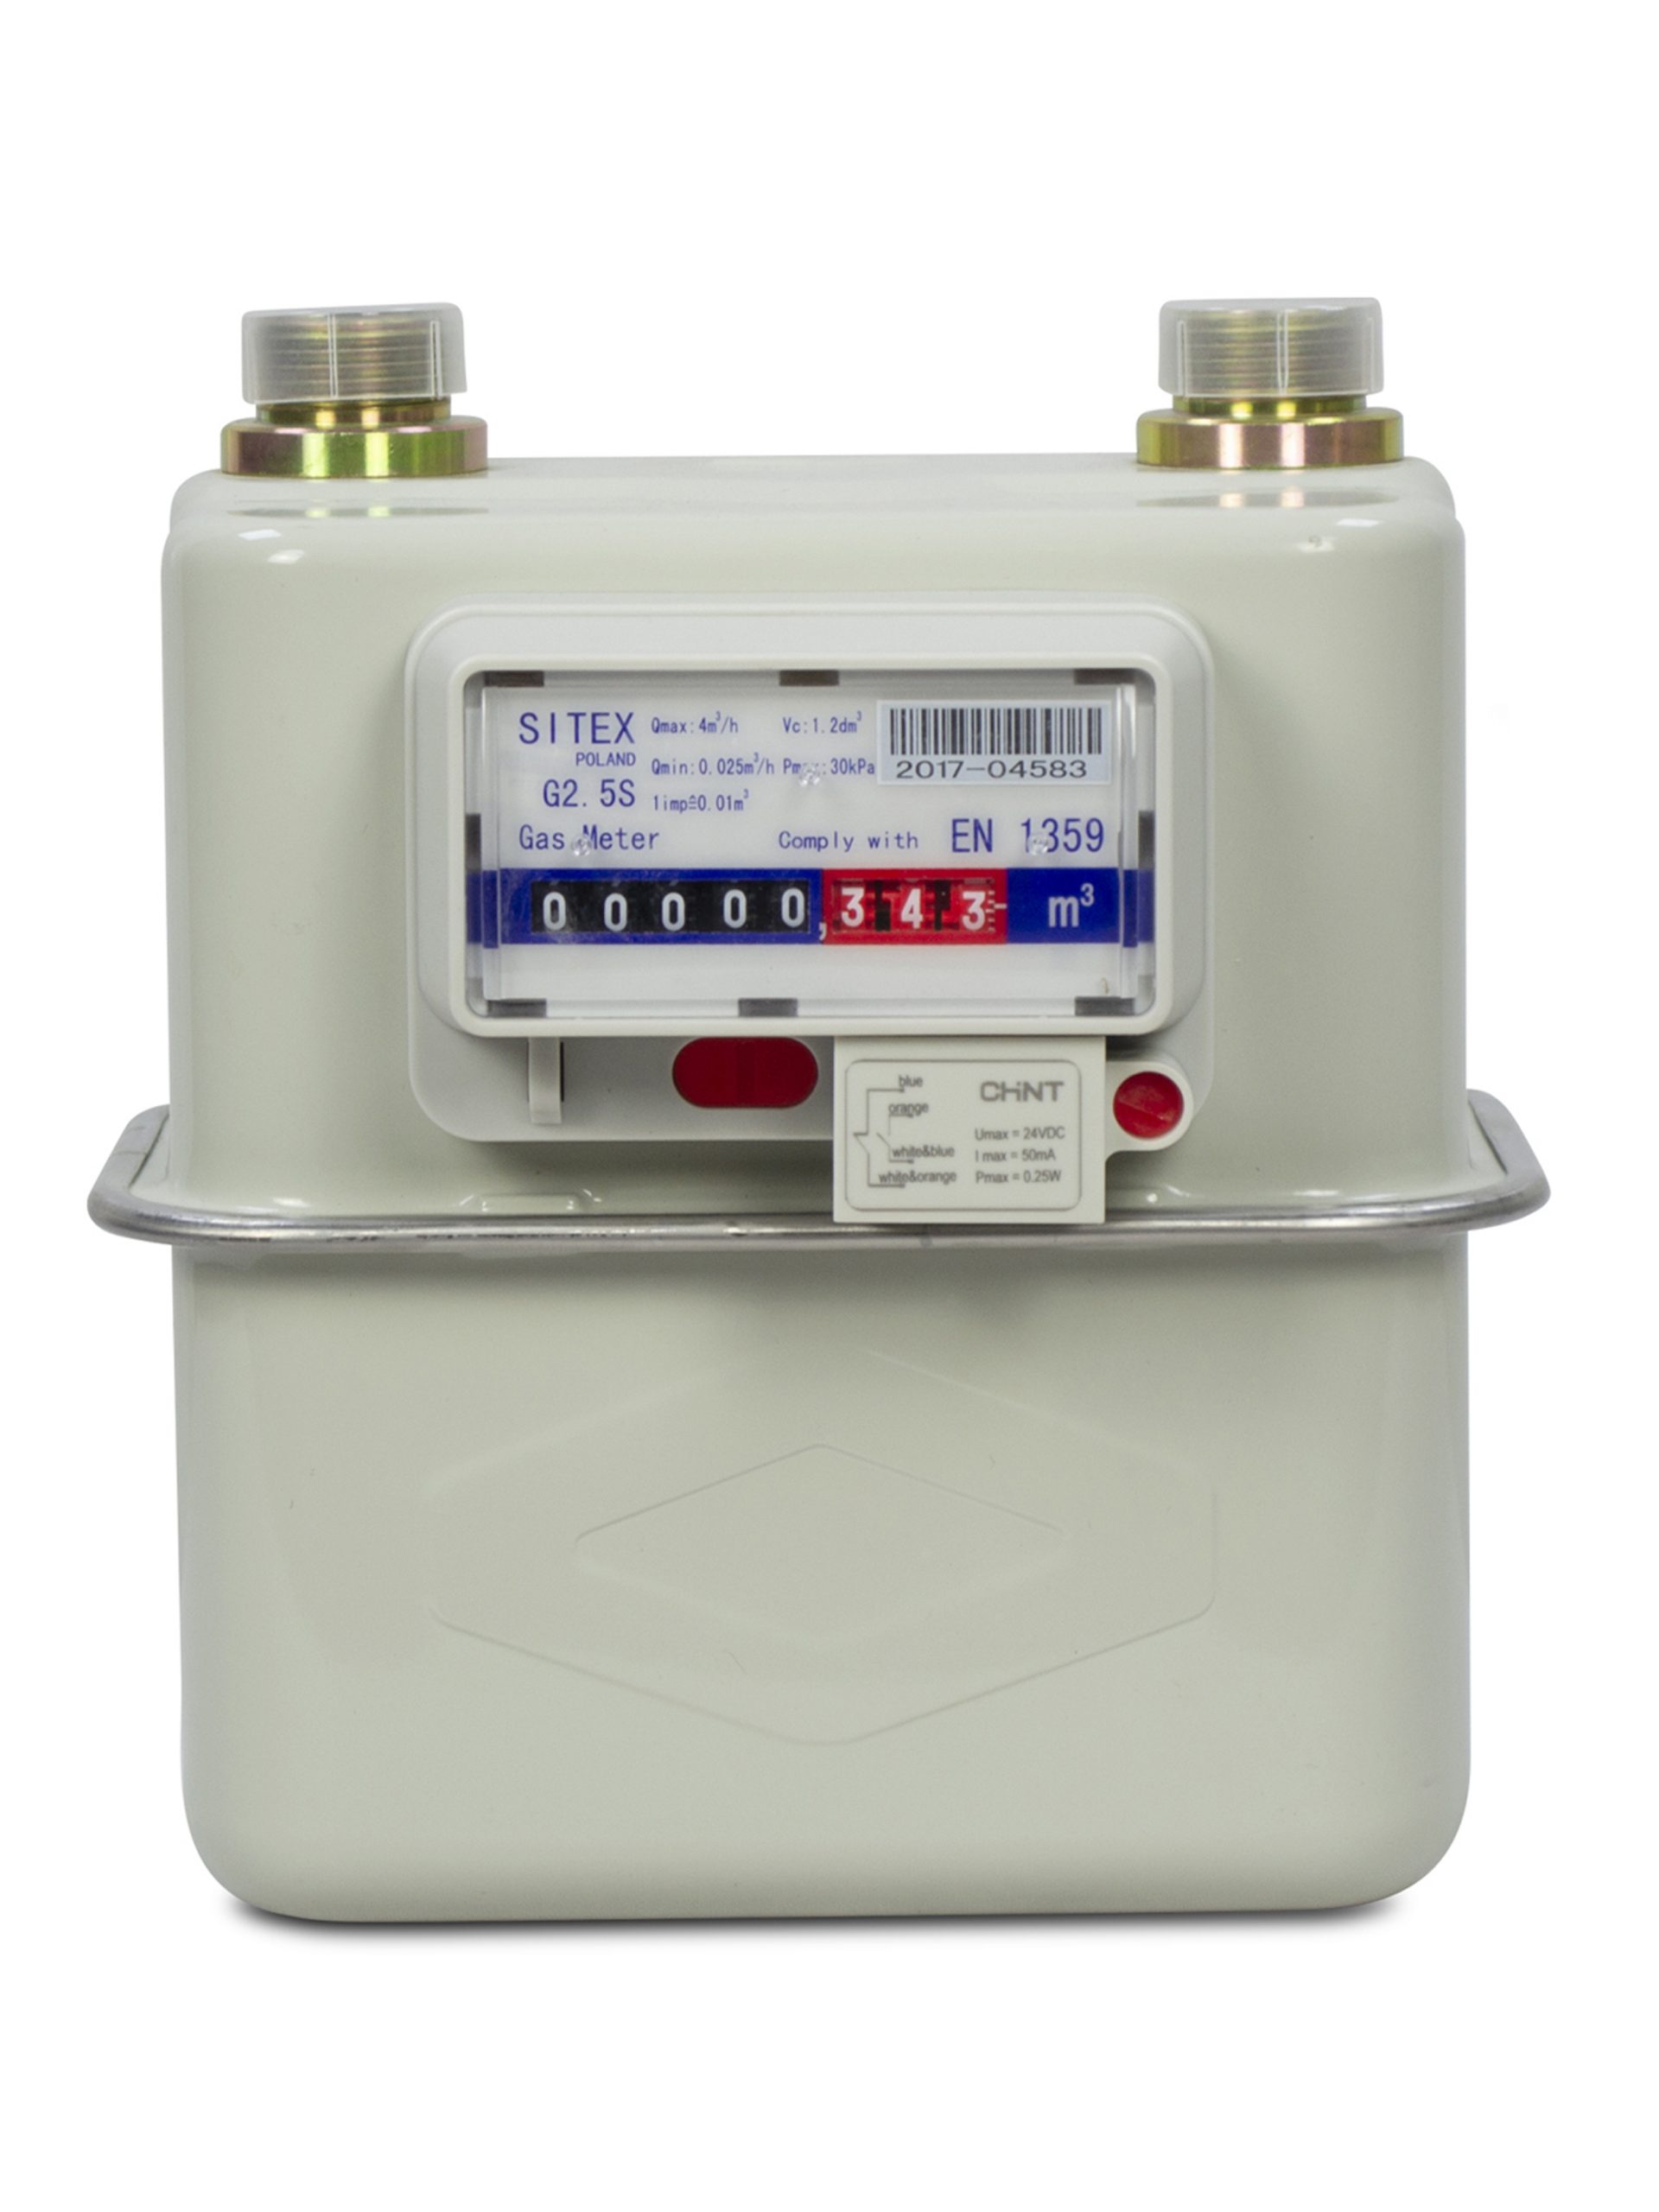 SITEX GAS METER G2.5 WITH CONNECTIONS & PULSE EMITTER